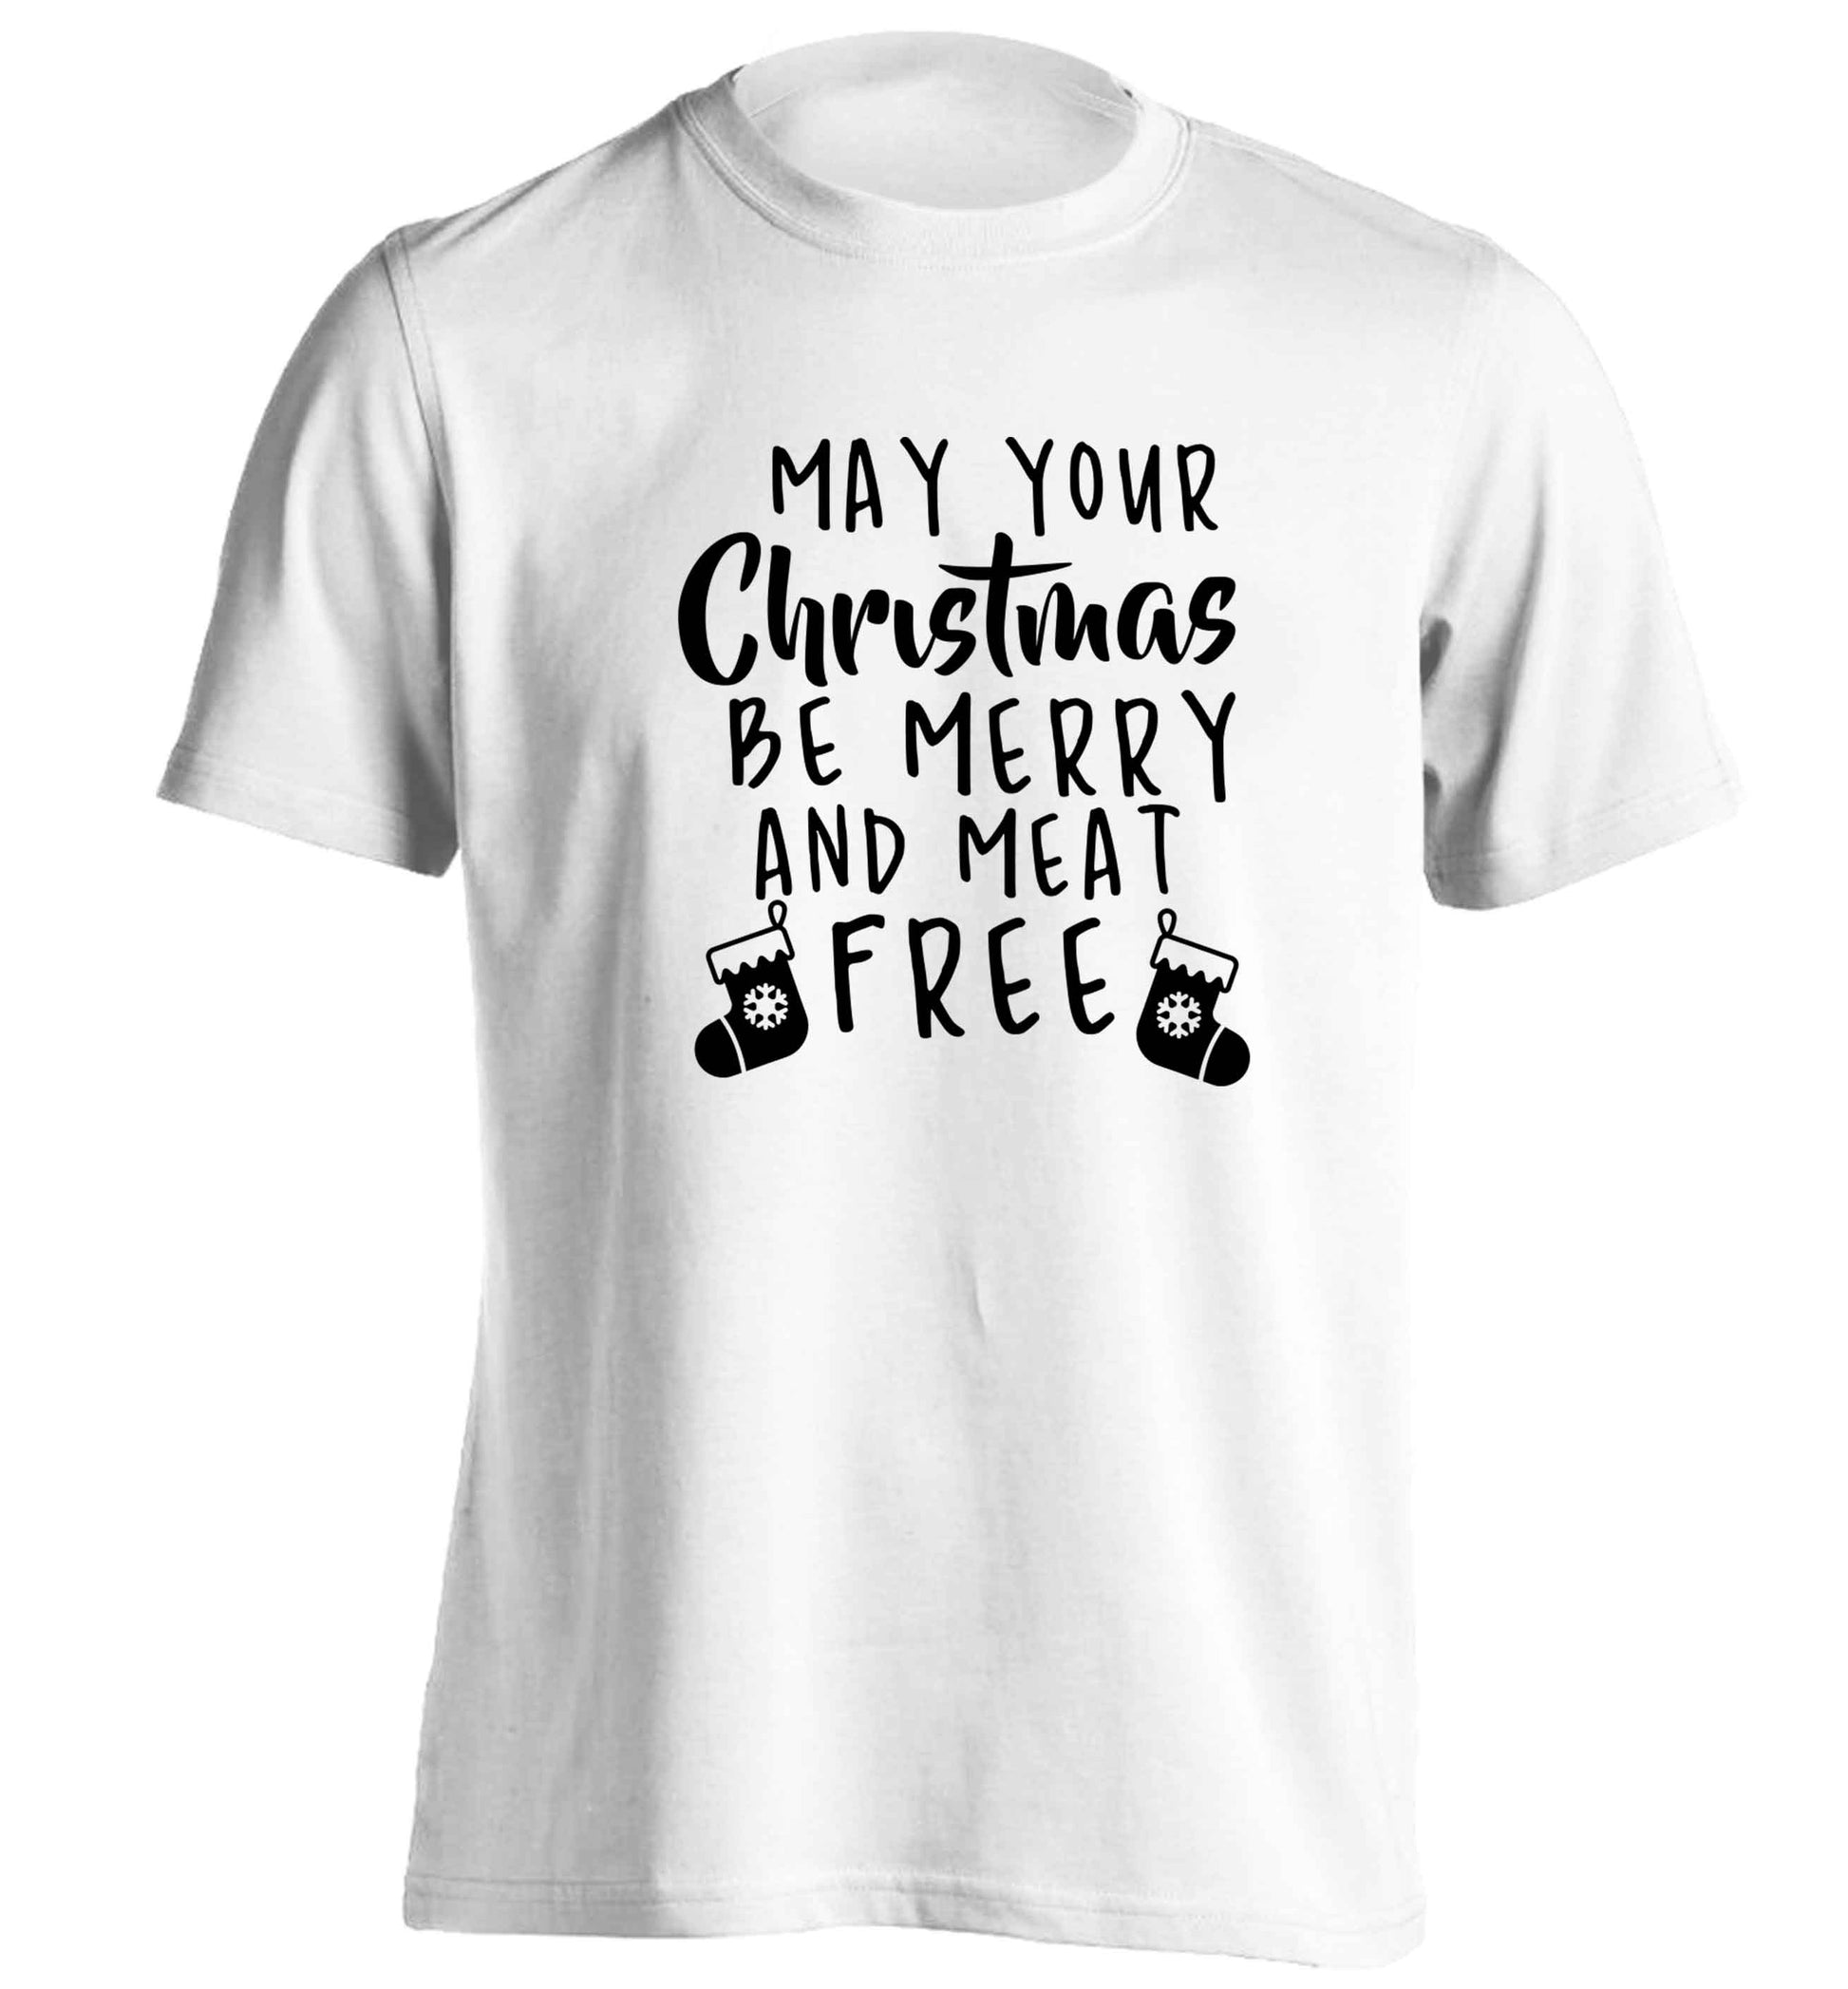 May your Christmas be merry and meat free adults unisex white Tshirt 2XL